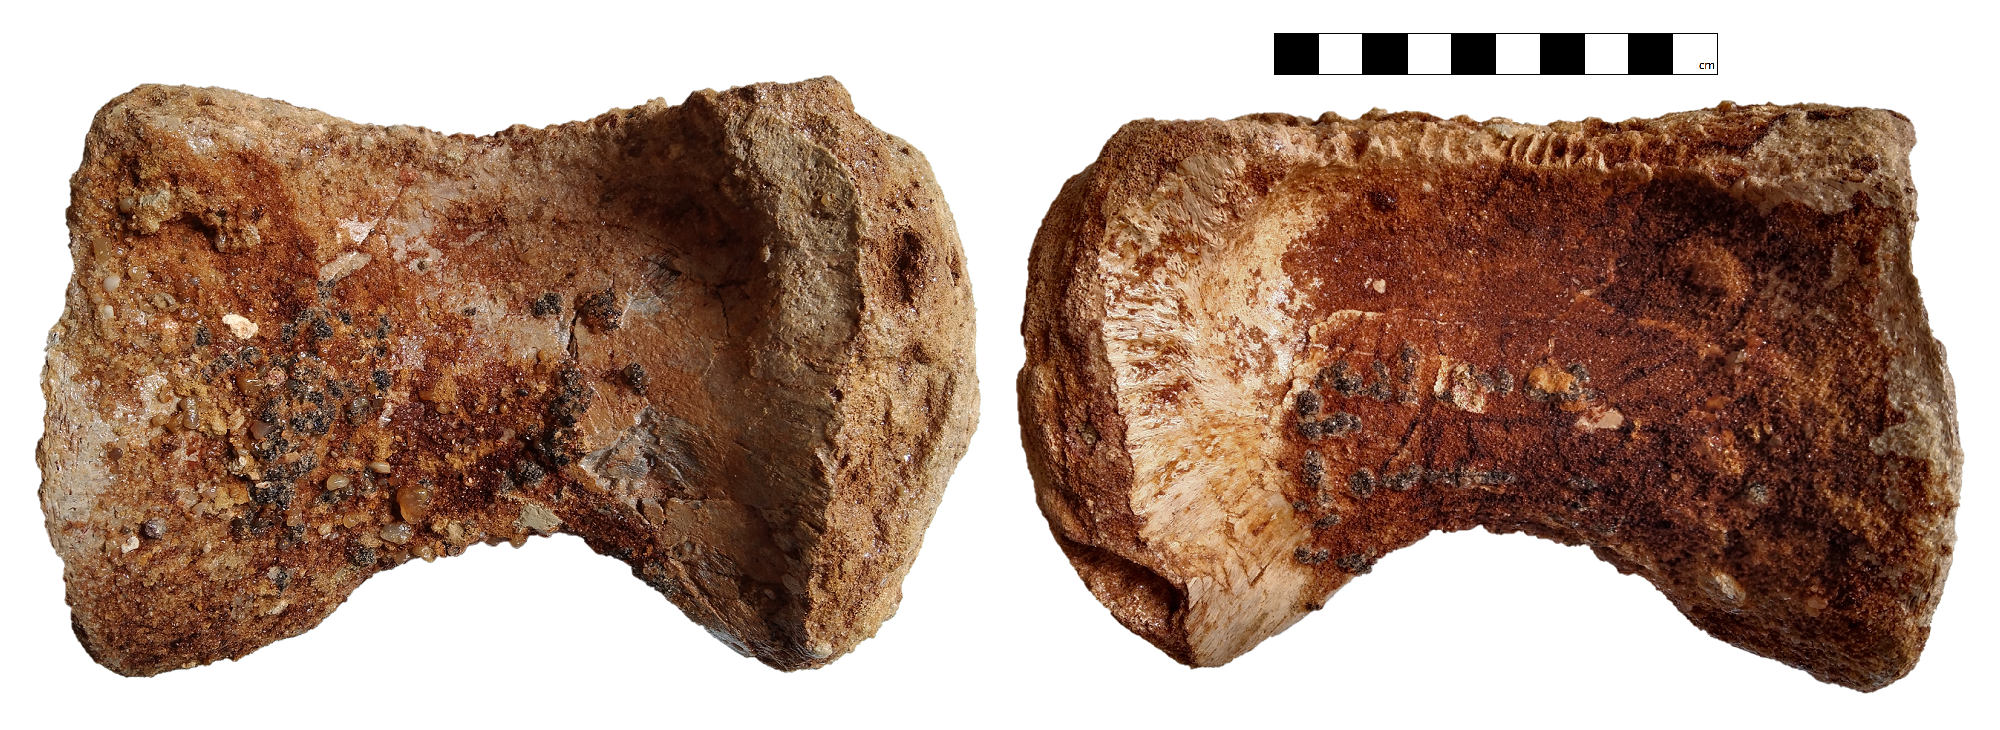 Mid dorsal vertebra (GCE2104133945) of Spinosaurid tentatively refer as Spinosaurus dorsojuvencus. From left image: in right lateral view (side view); Right image: in left lateral view